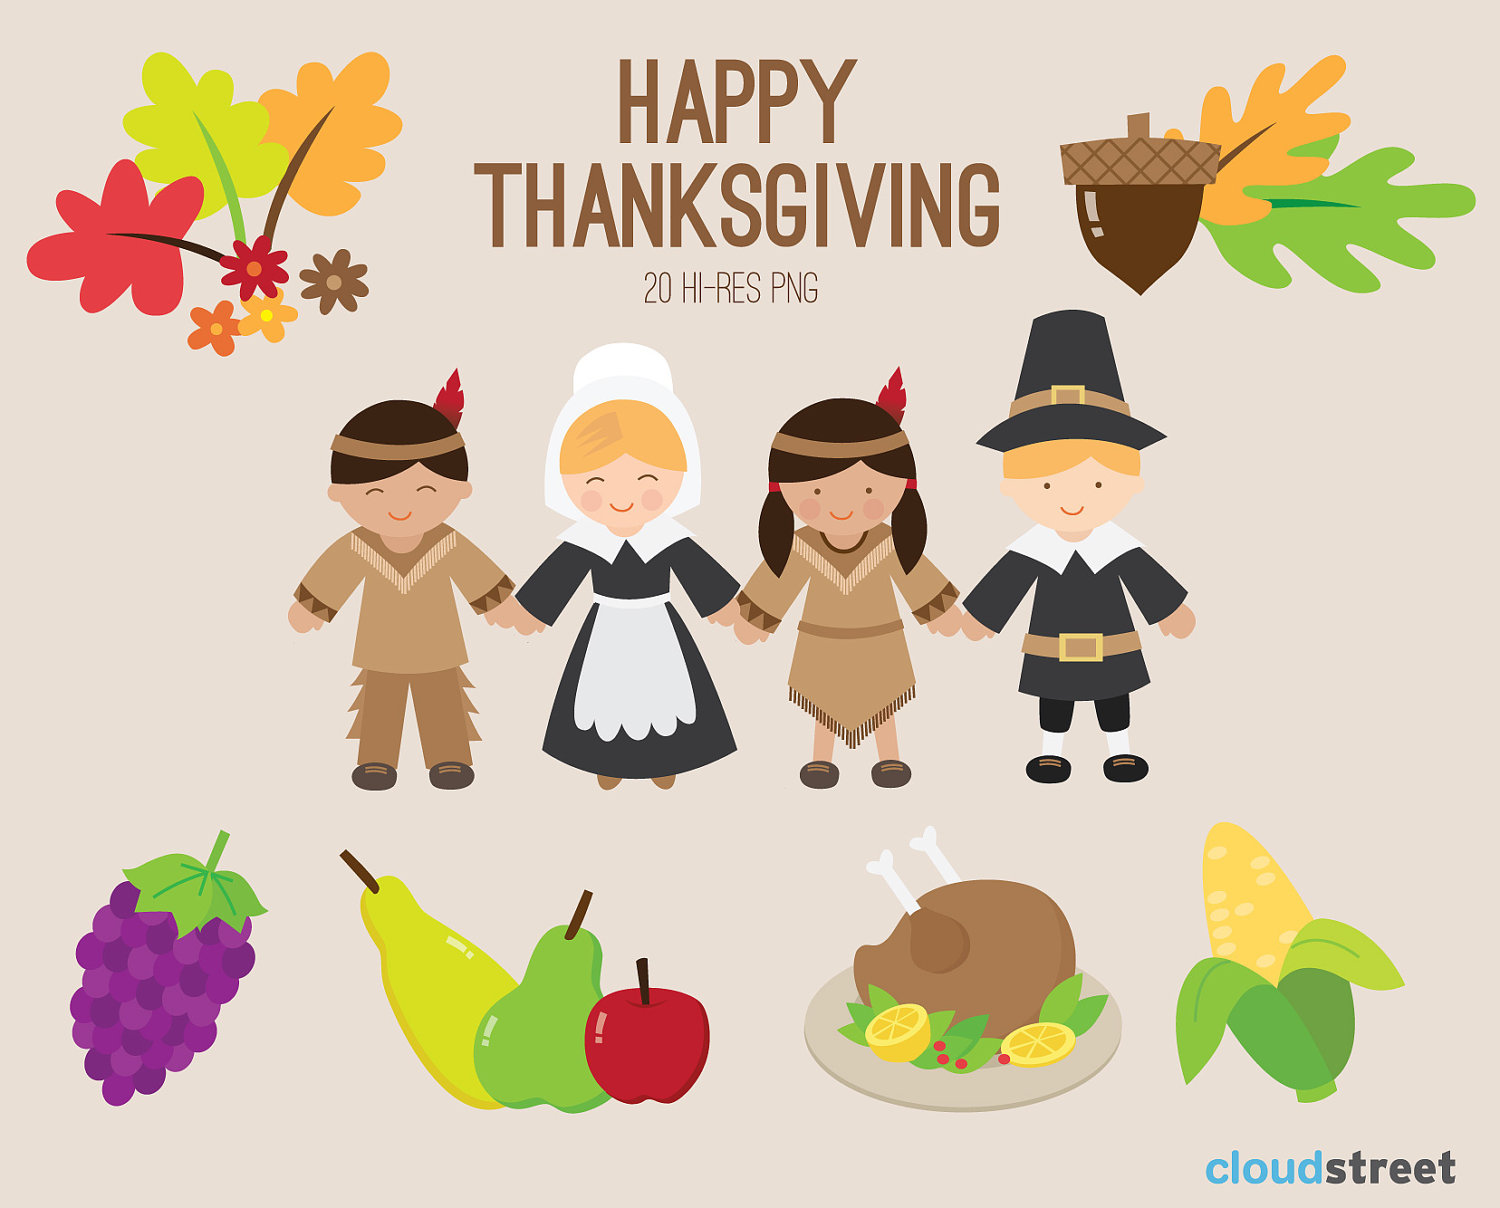 Buy 2 Get 1 Free Happy Thanksgiving Clip Art For By Cloudstreetlab